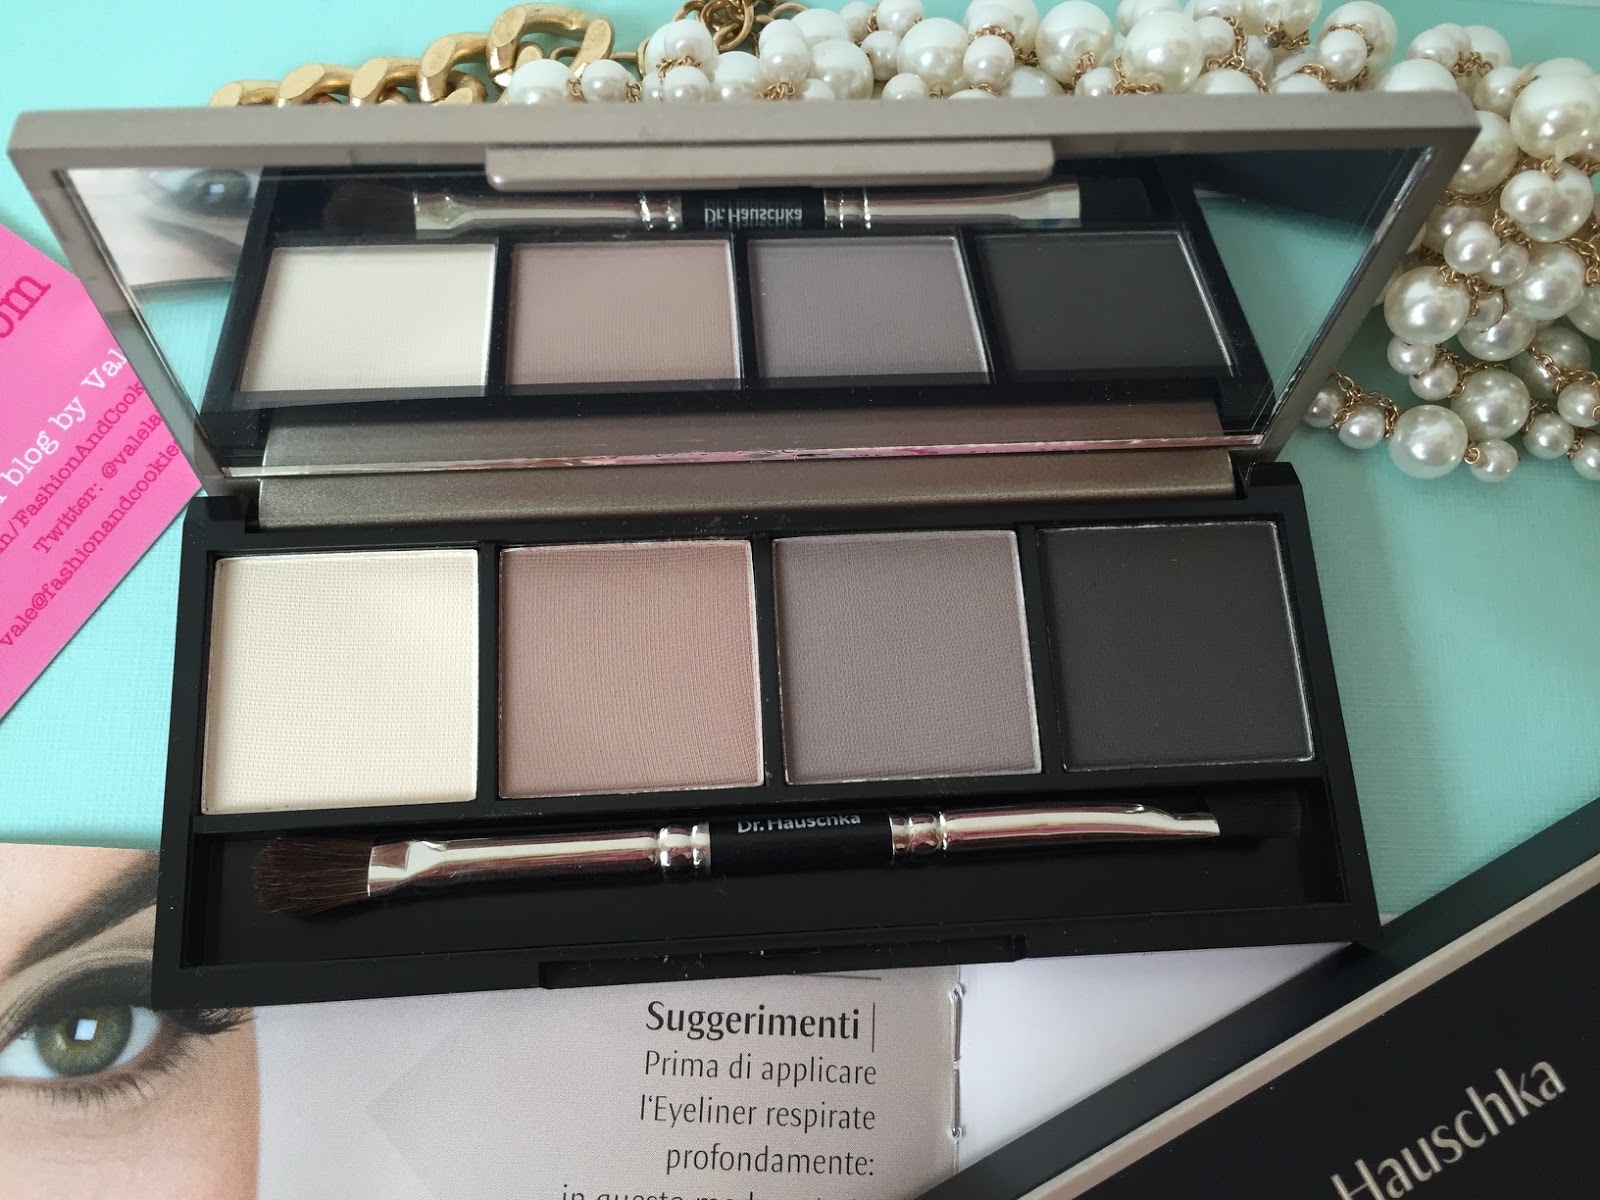 Dr. Hauschka Limited Edition palette Sguardi Preziosi on Fashion and Cookies fashion and beauty blog, fashion blogger style